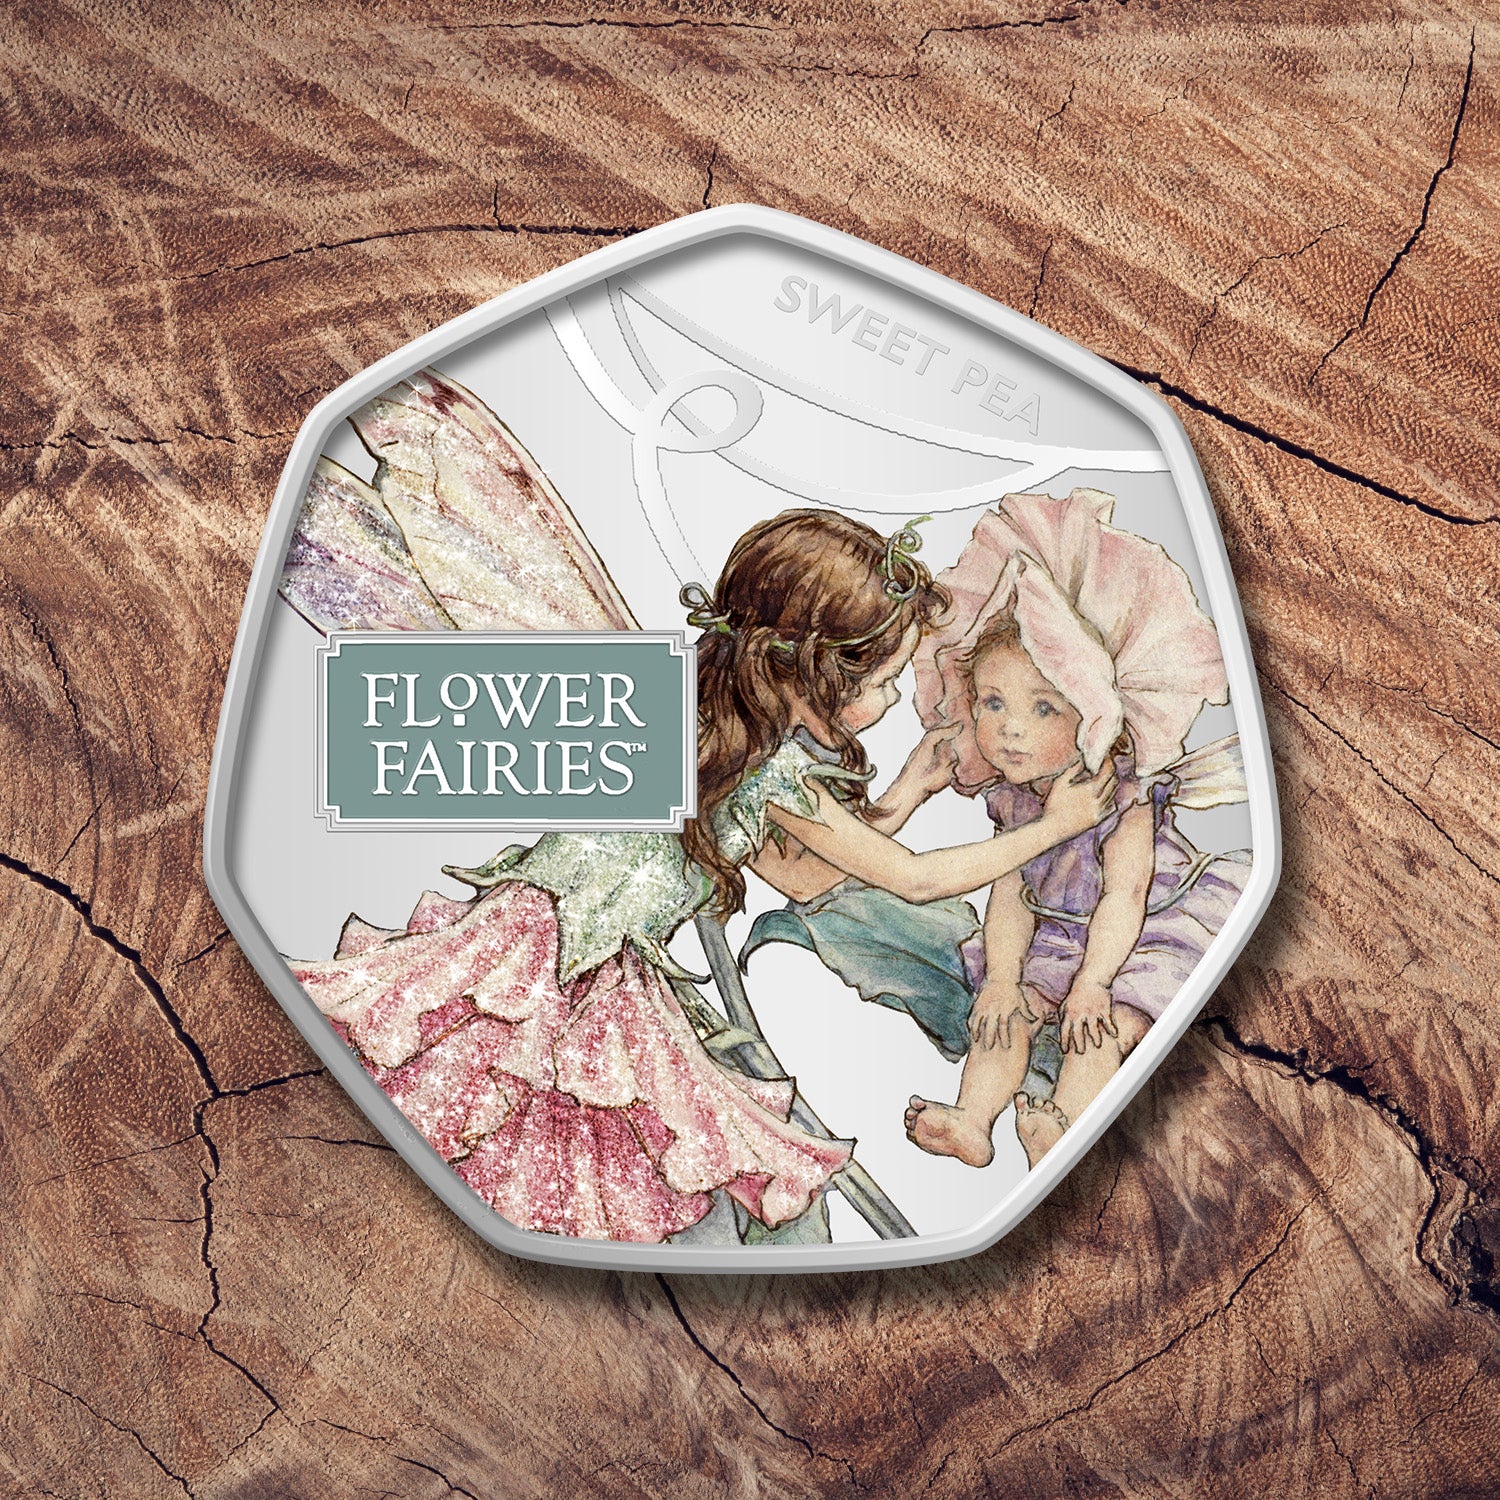 The Official Flower Fairies Coin Collection